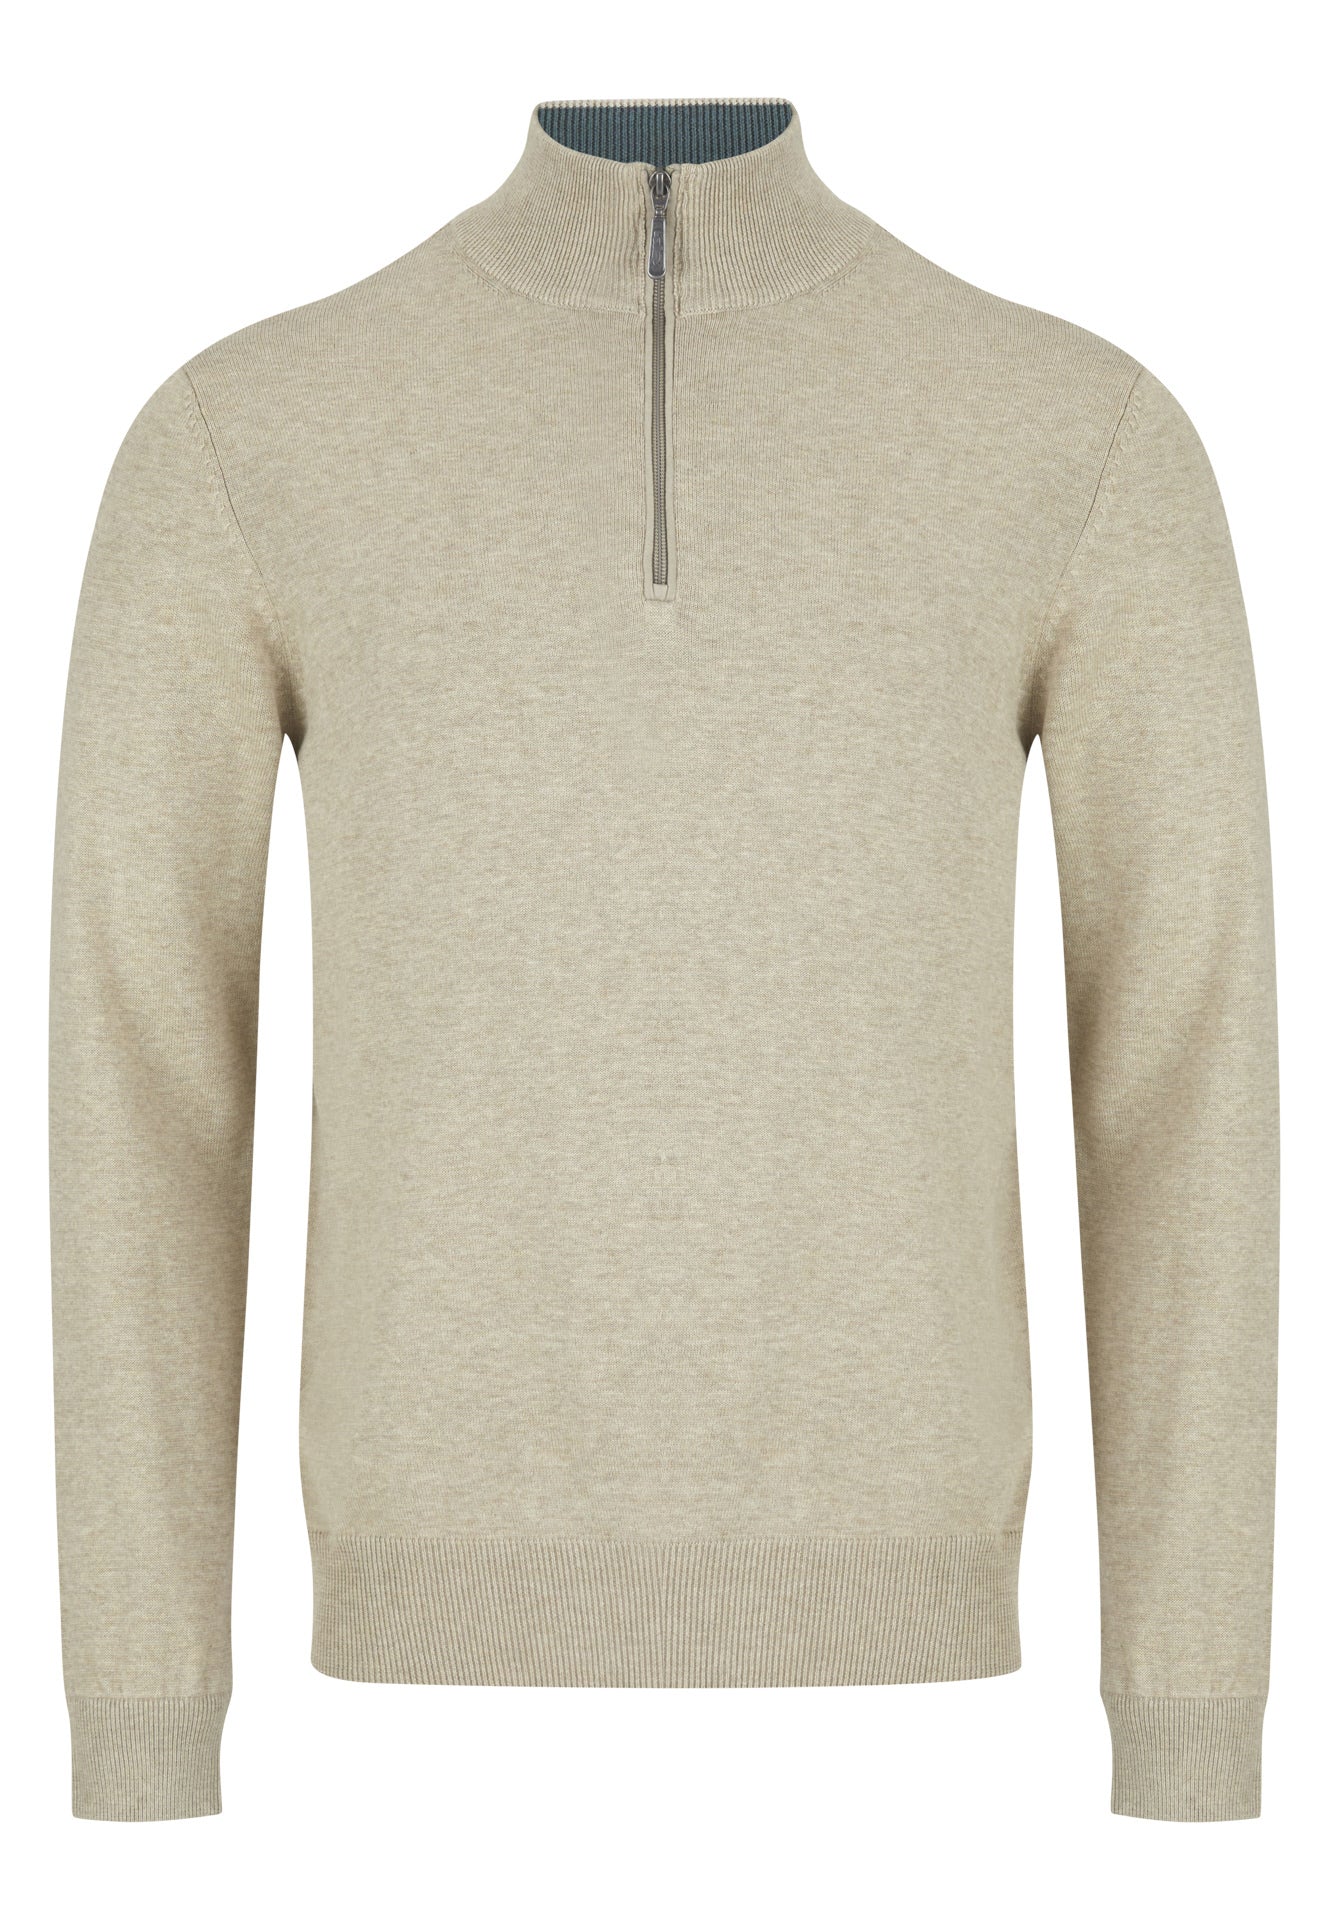 Men's Harry 1/4 Zip - Pussywillow-Front View